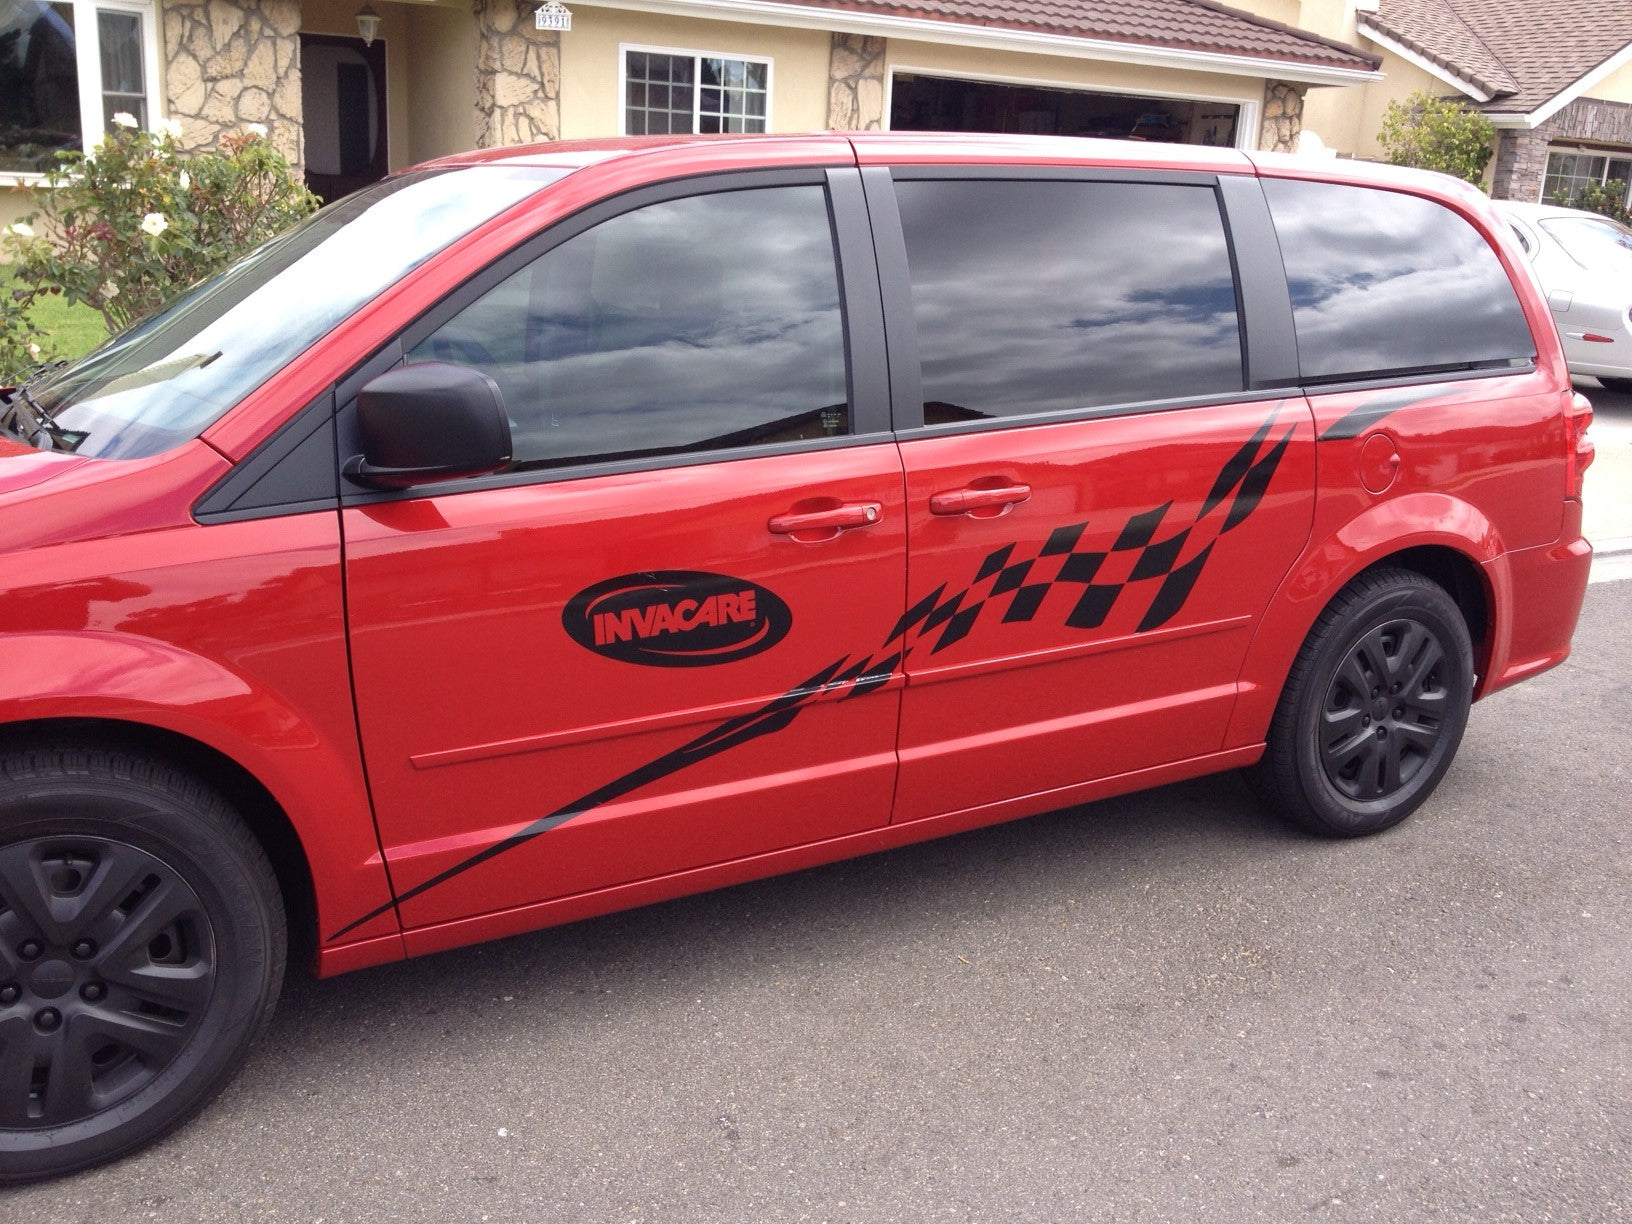 black checkered vinyl decal on the side of red mini van